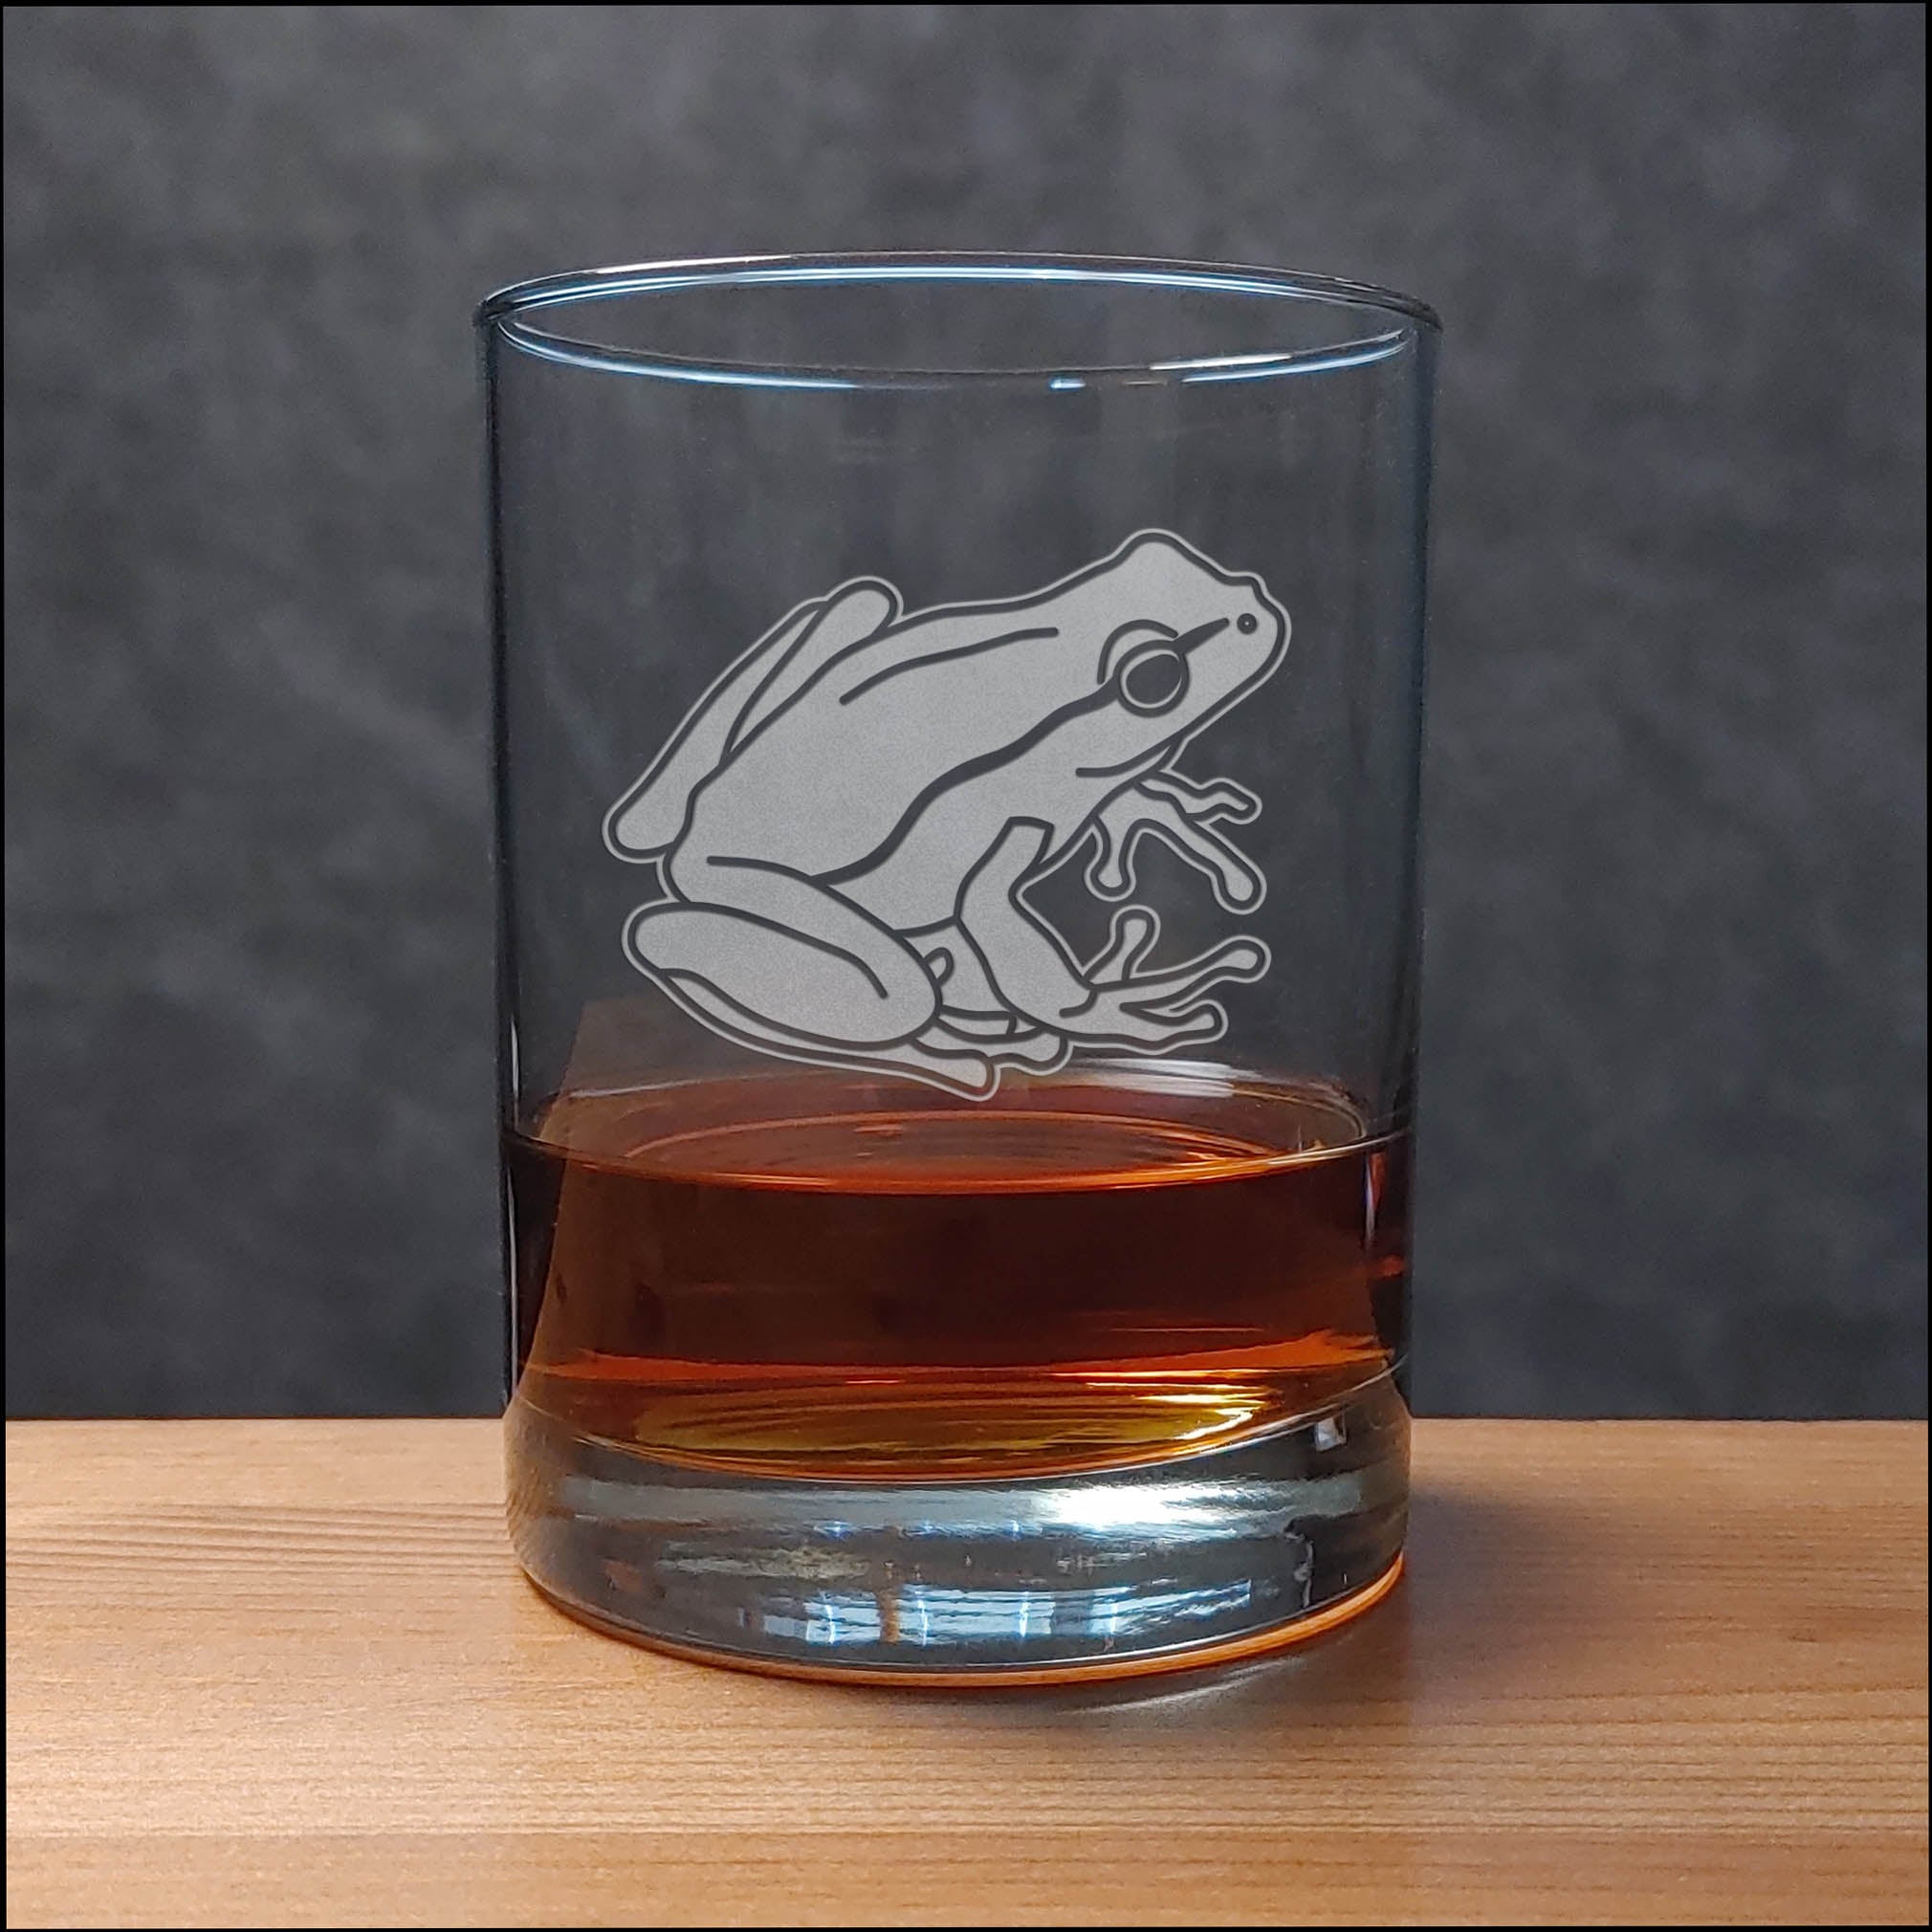 Garden Frog 13 oz Whisky Glass - Copyright Hues in Glass